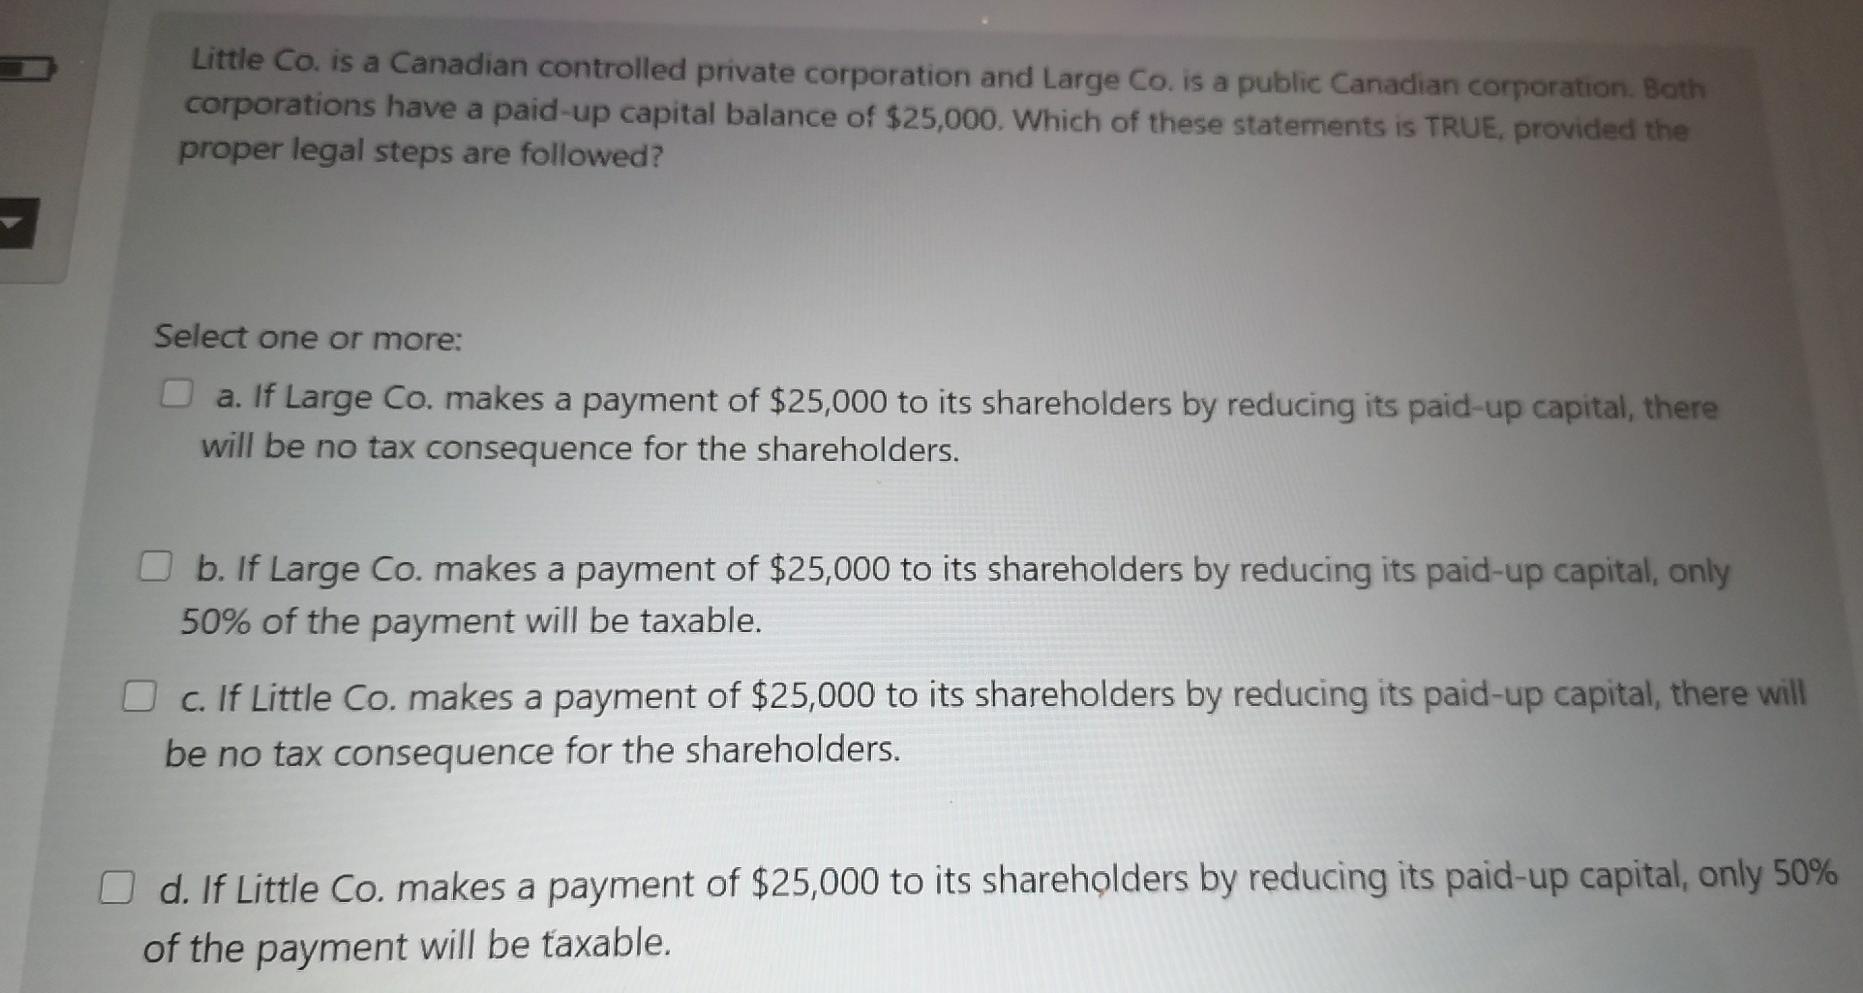 Little Co. is a Canadian controlled private corporation and Large Co. is a public Canadian corporation. Bothcorporations hav